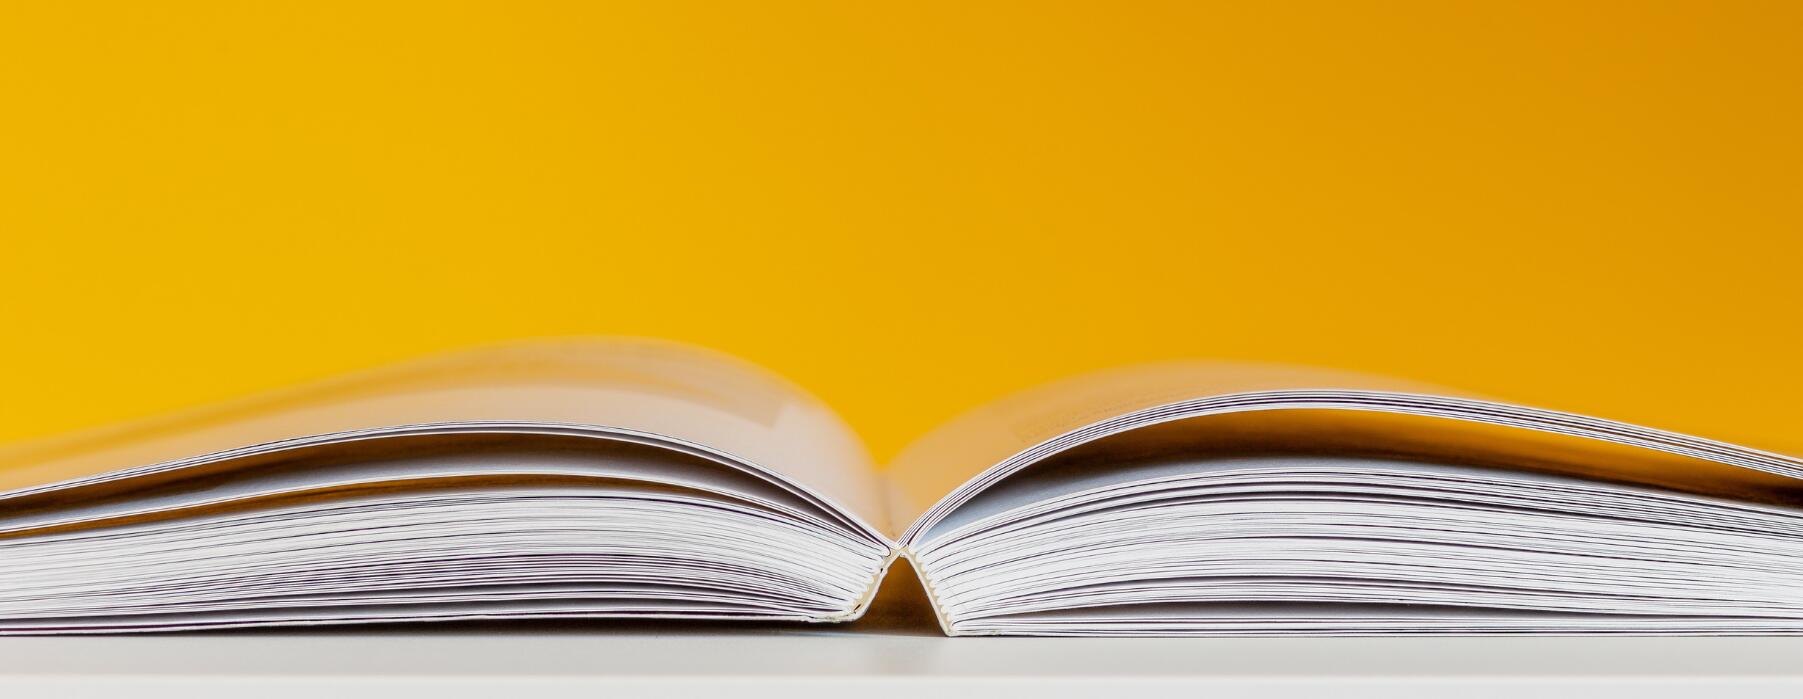 Open book on yellow background